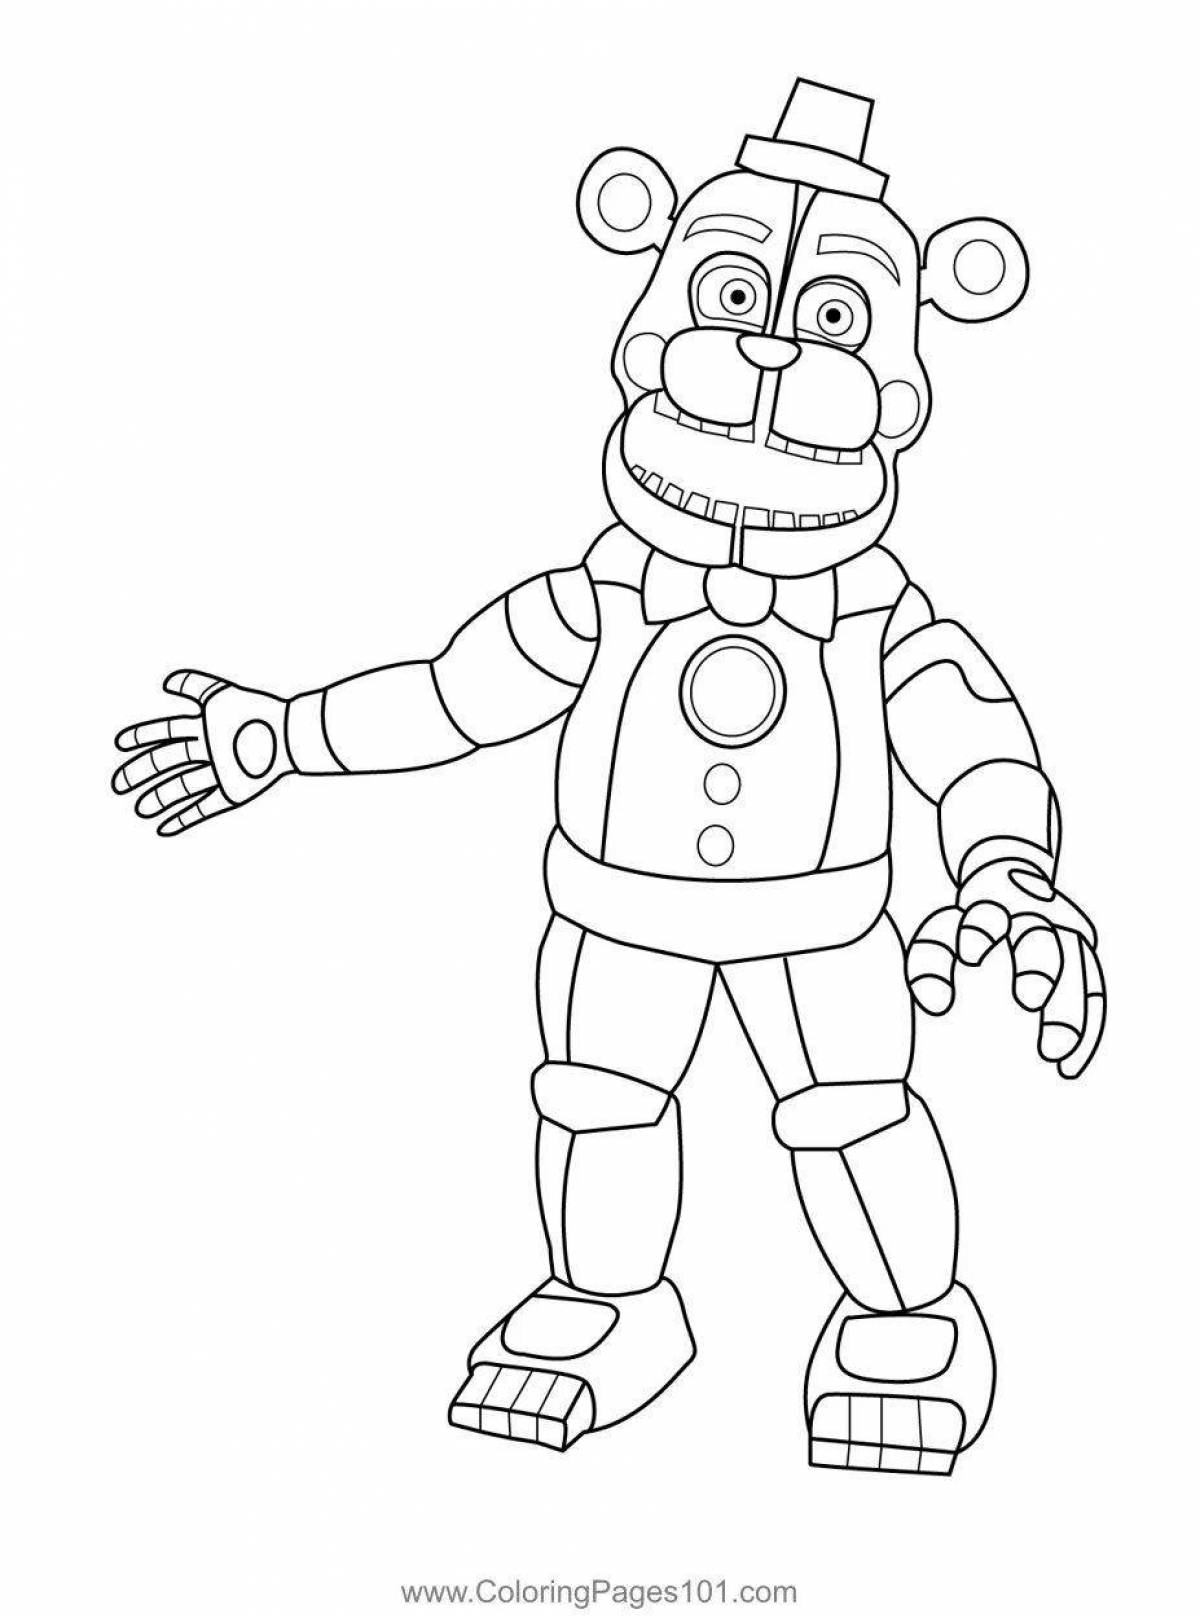 Rockstar bonnie awesome coloring book